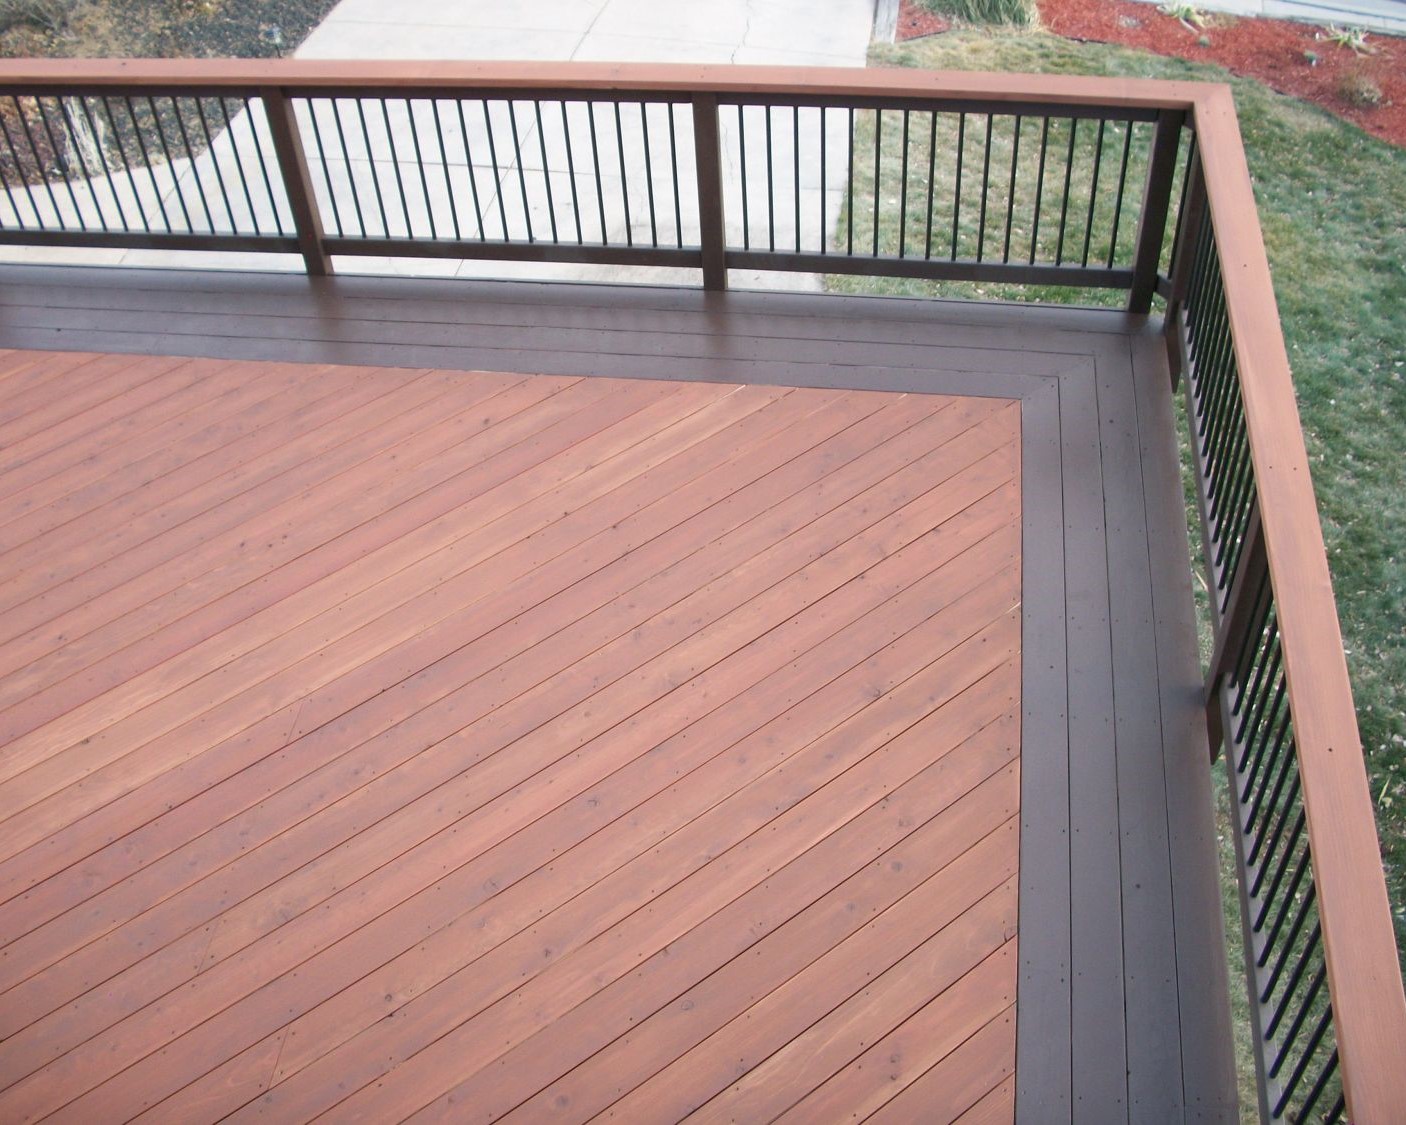 A redwood deck with the boards laid at 45-degree angle to the joists. It also has a quadruple picture frame border stained in a contrasting color.